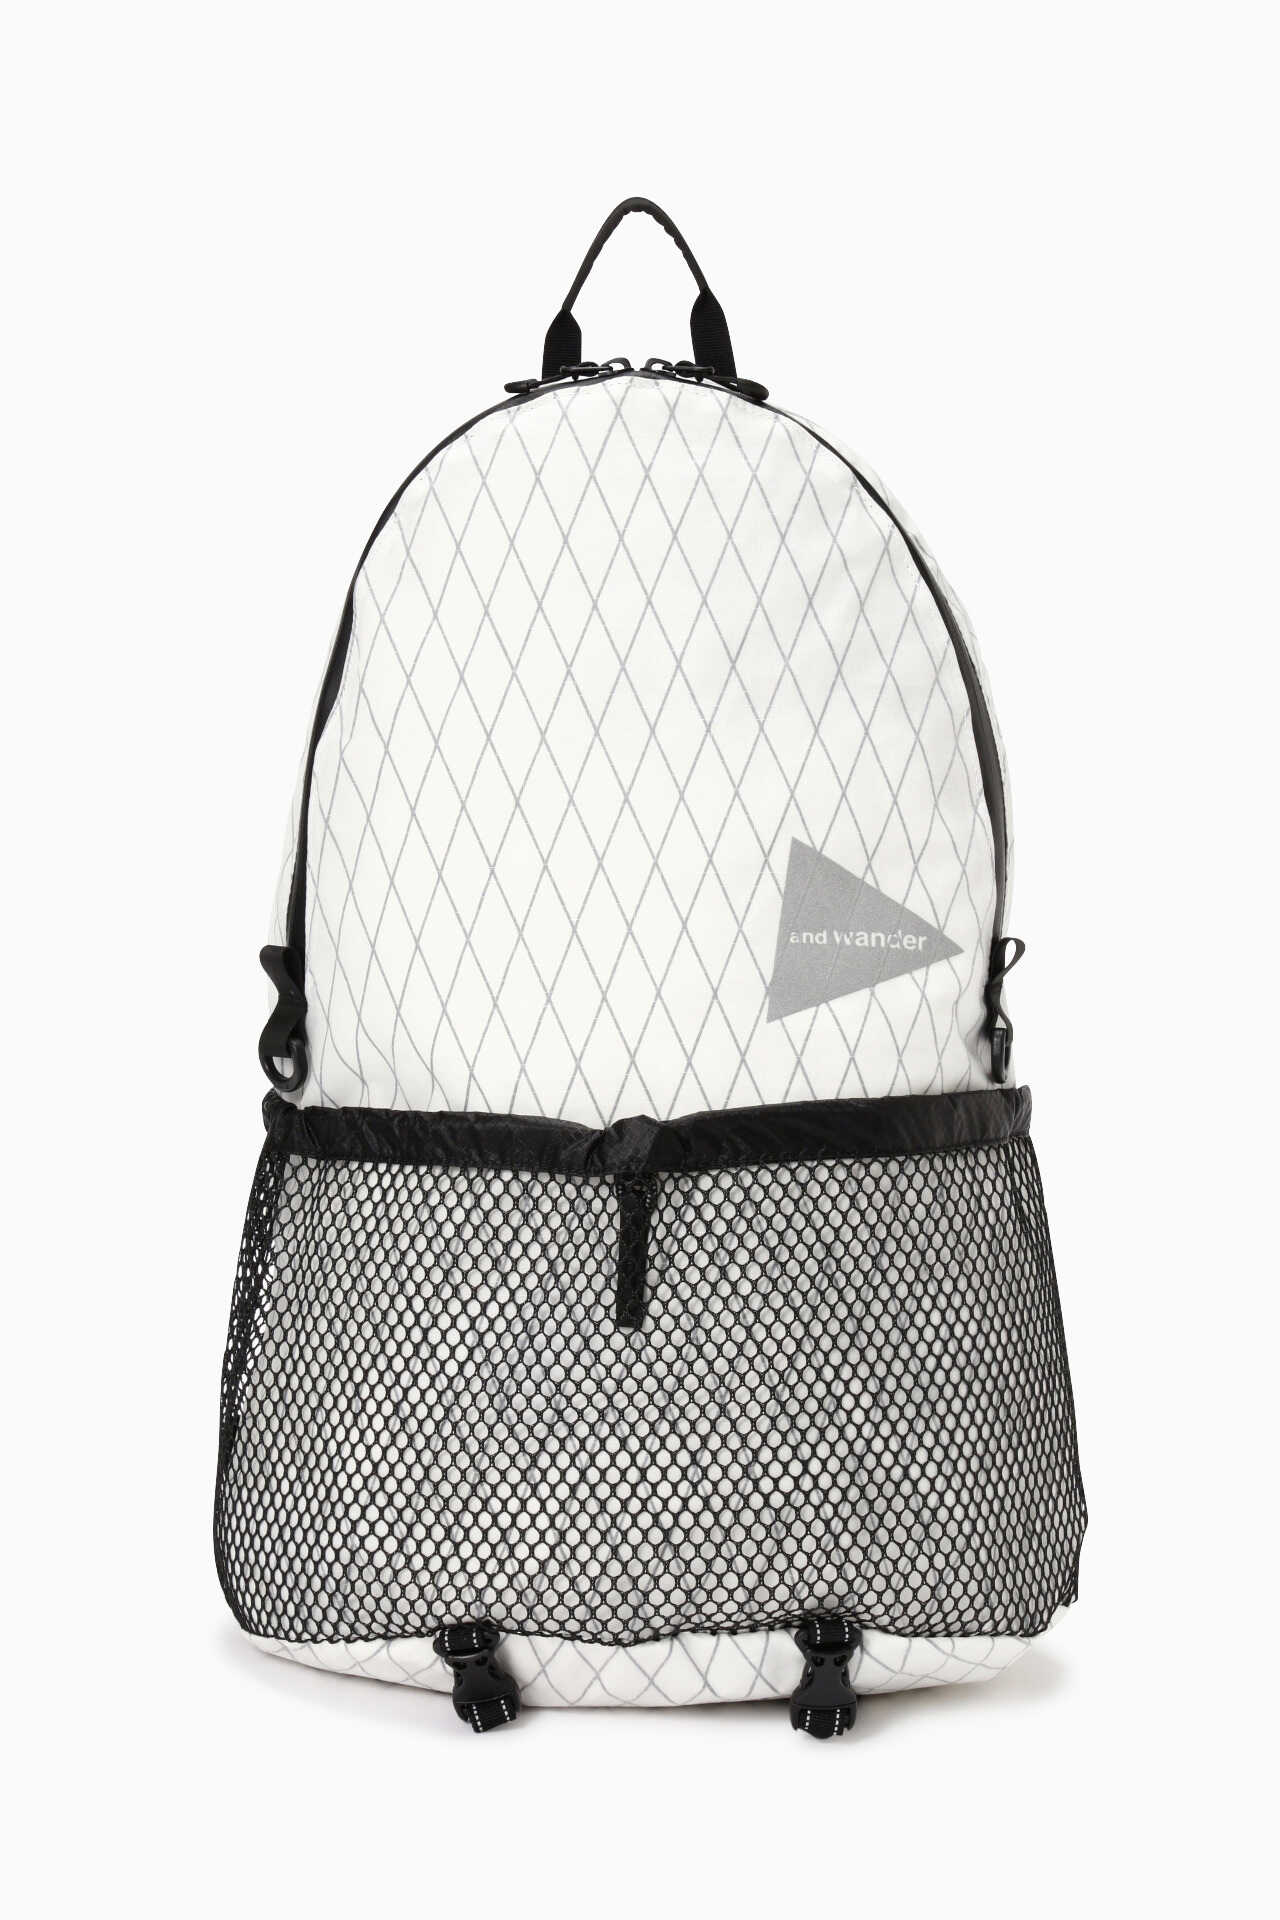 and wander X-Pac 20L daypackバッグ